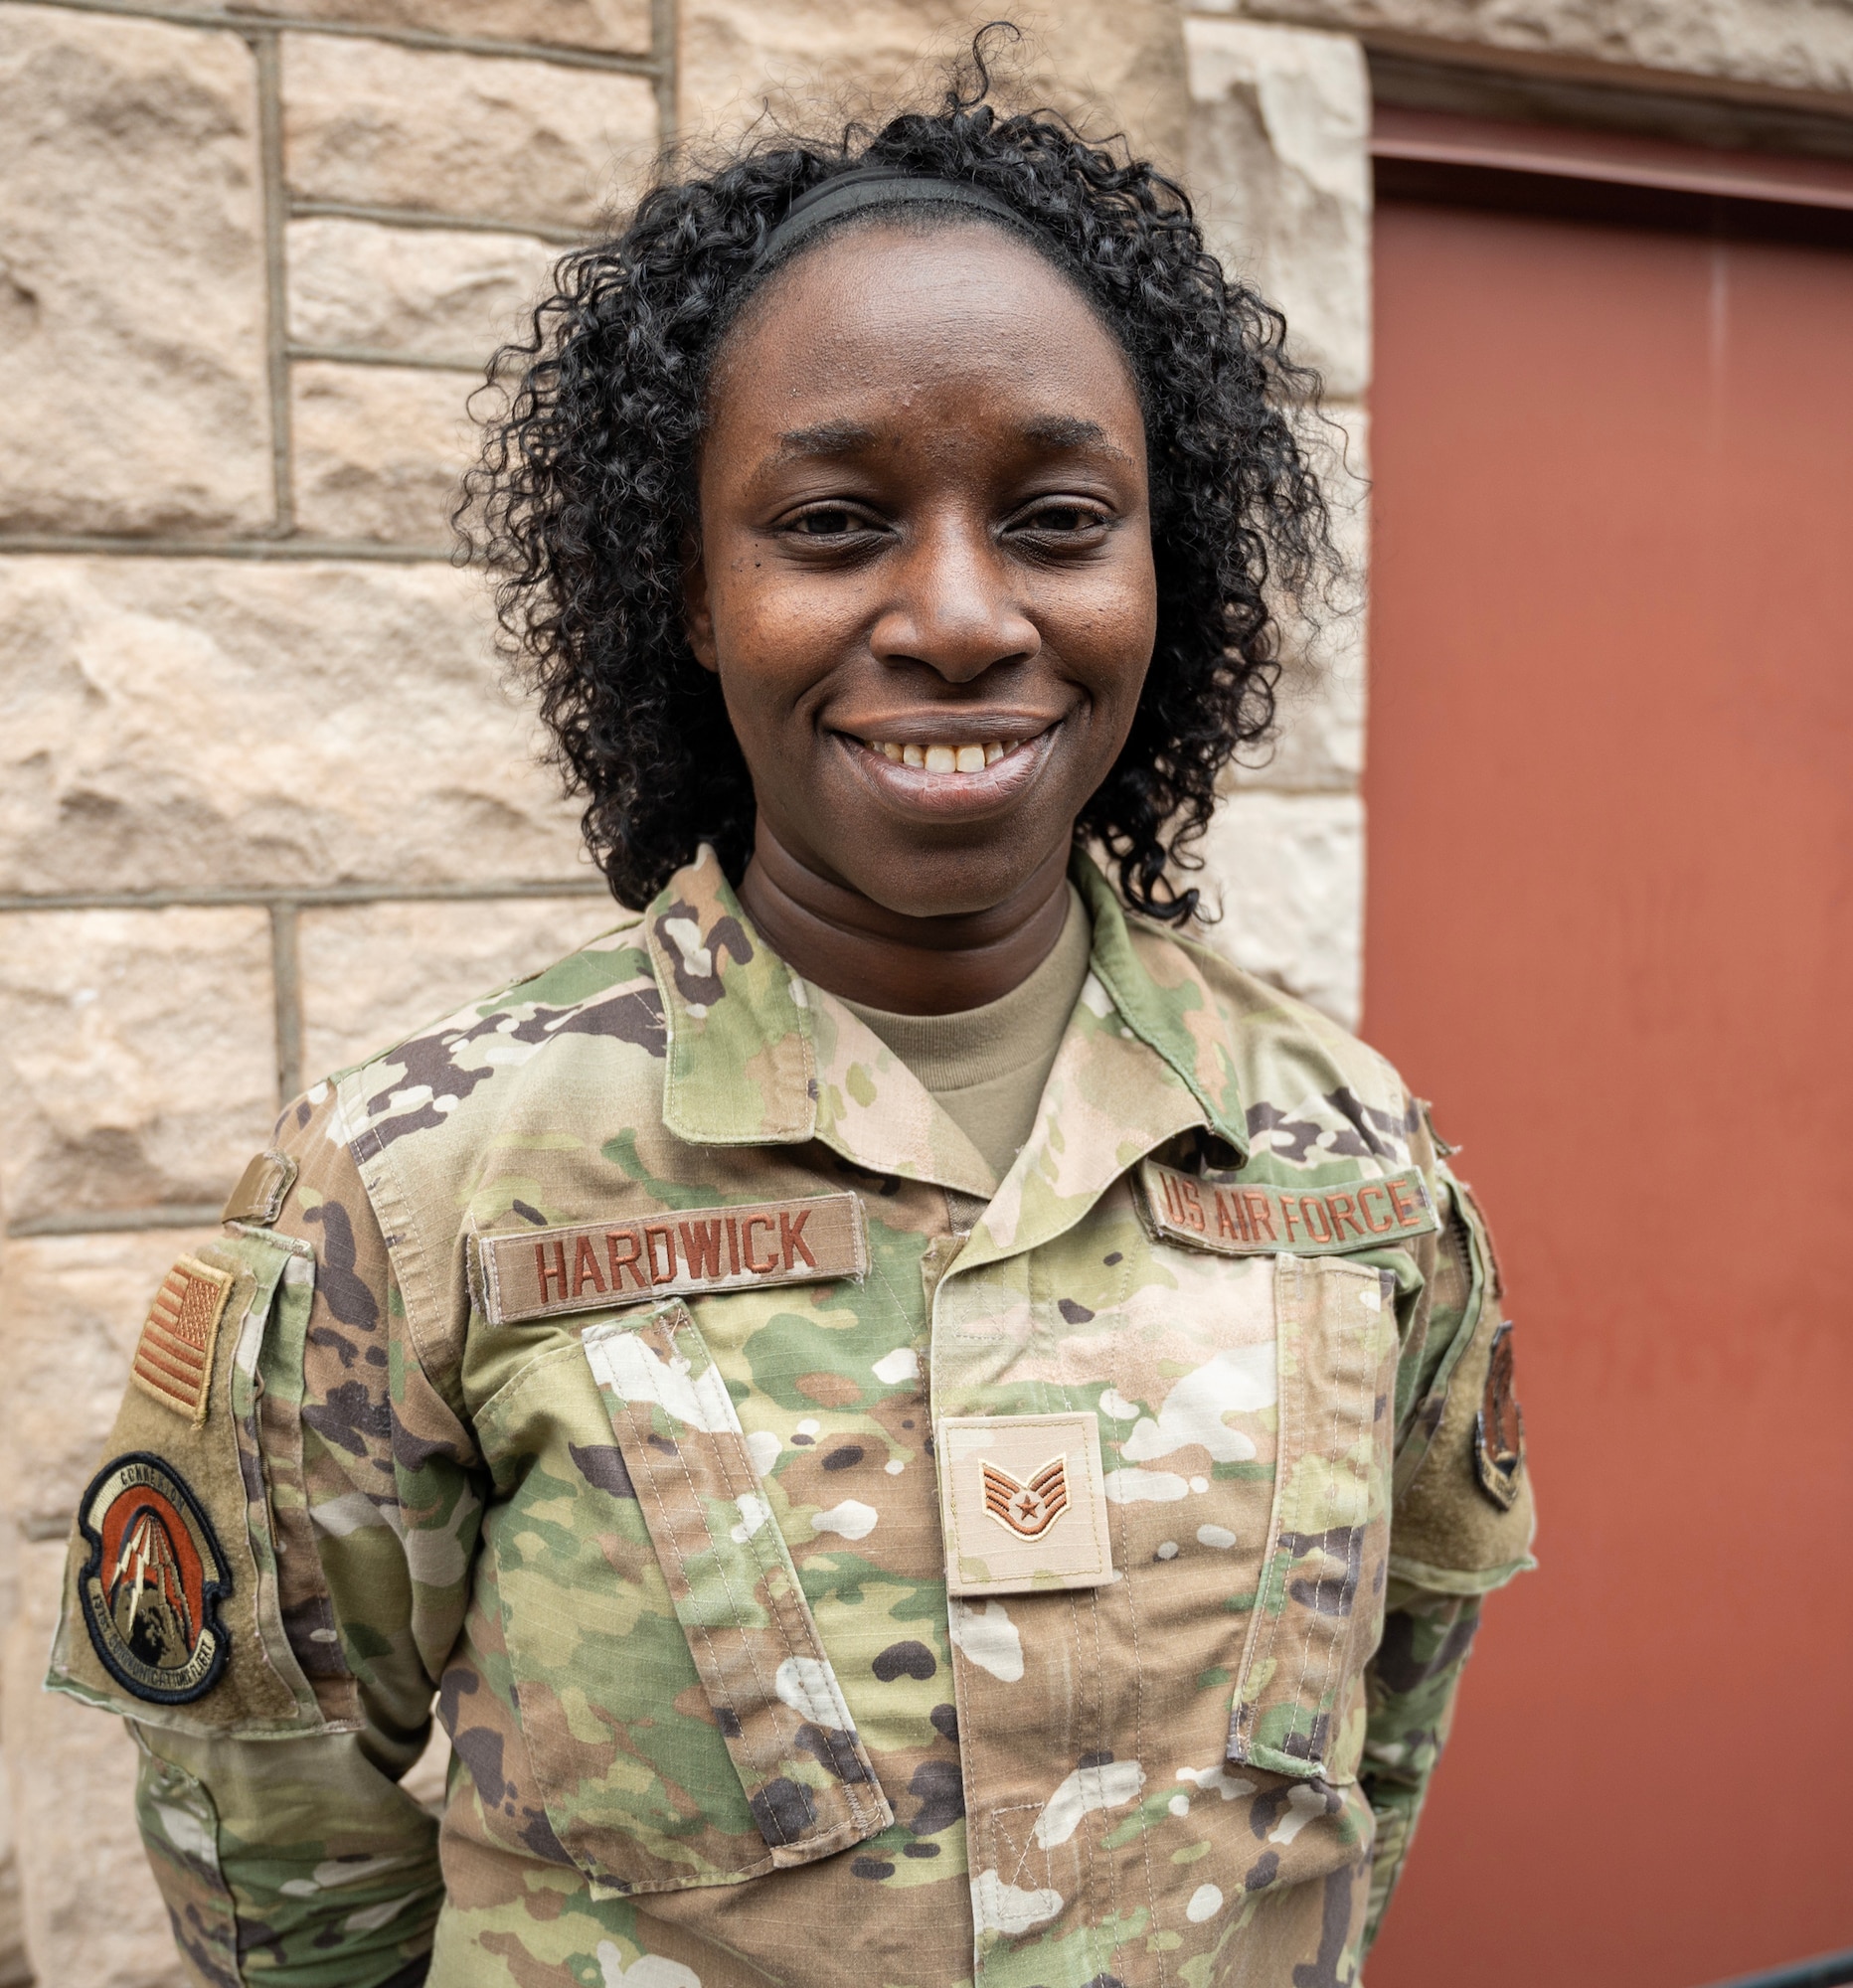 A U.S. Air Force Airman poses for a photo. She is wearing an OCP pattern uniform.